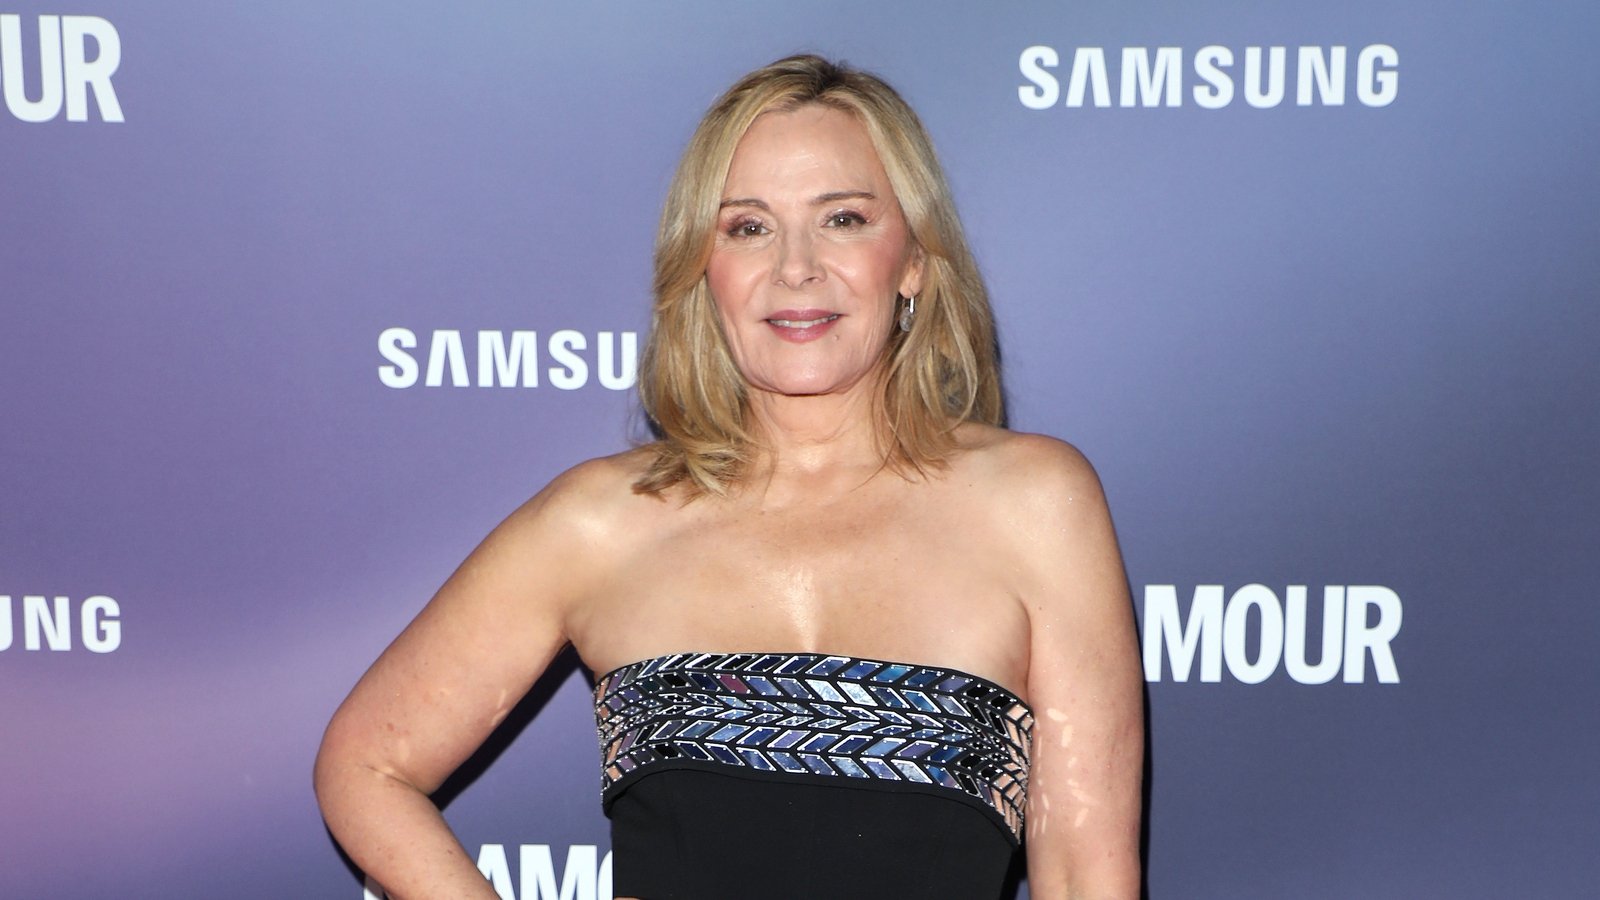 Kim Cattrall Gives Off Samantha Jones Vibes as She Models for SKIMS